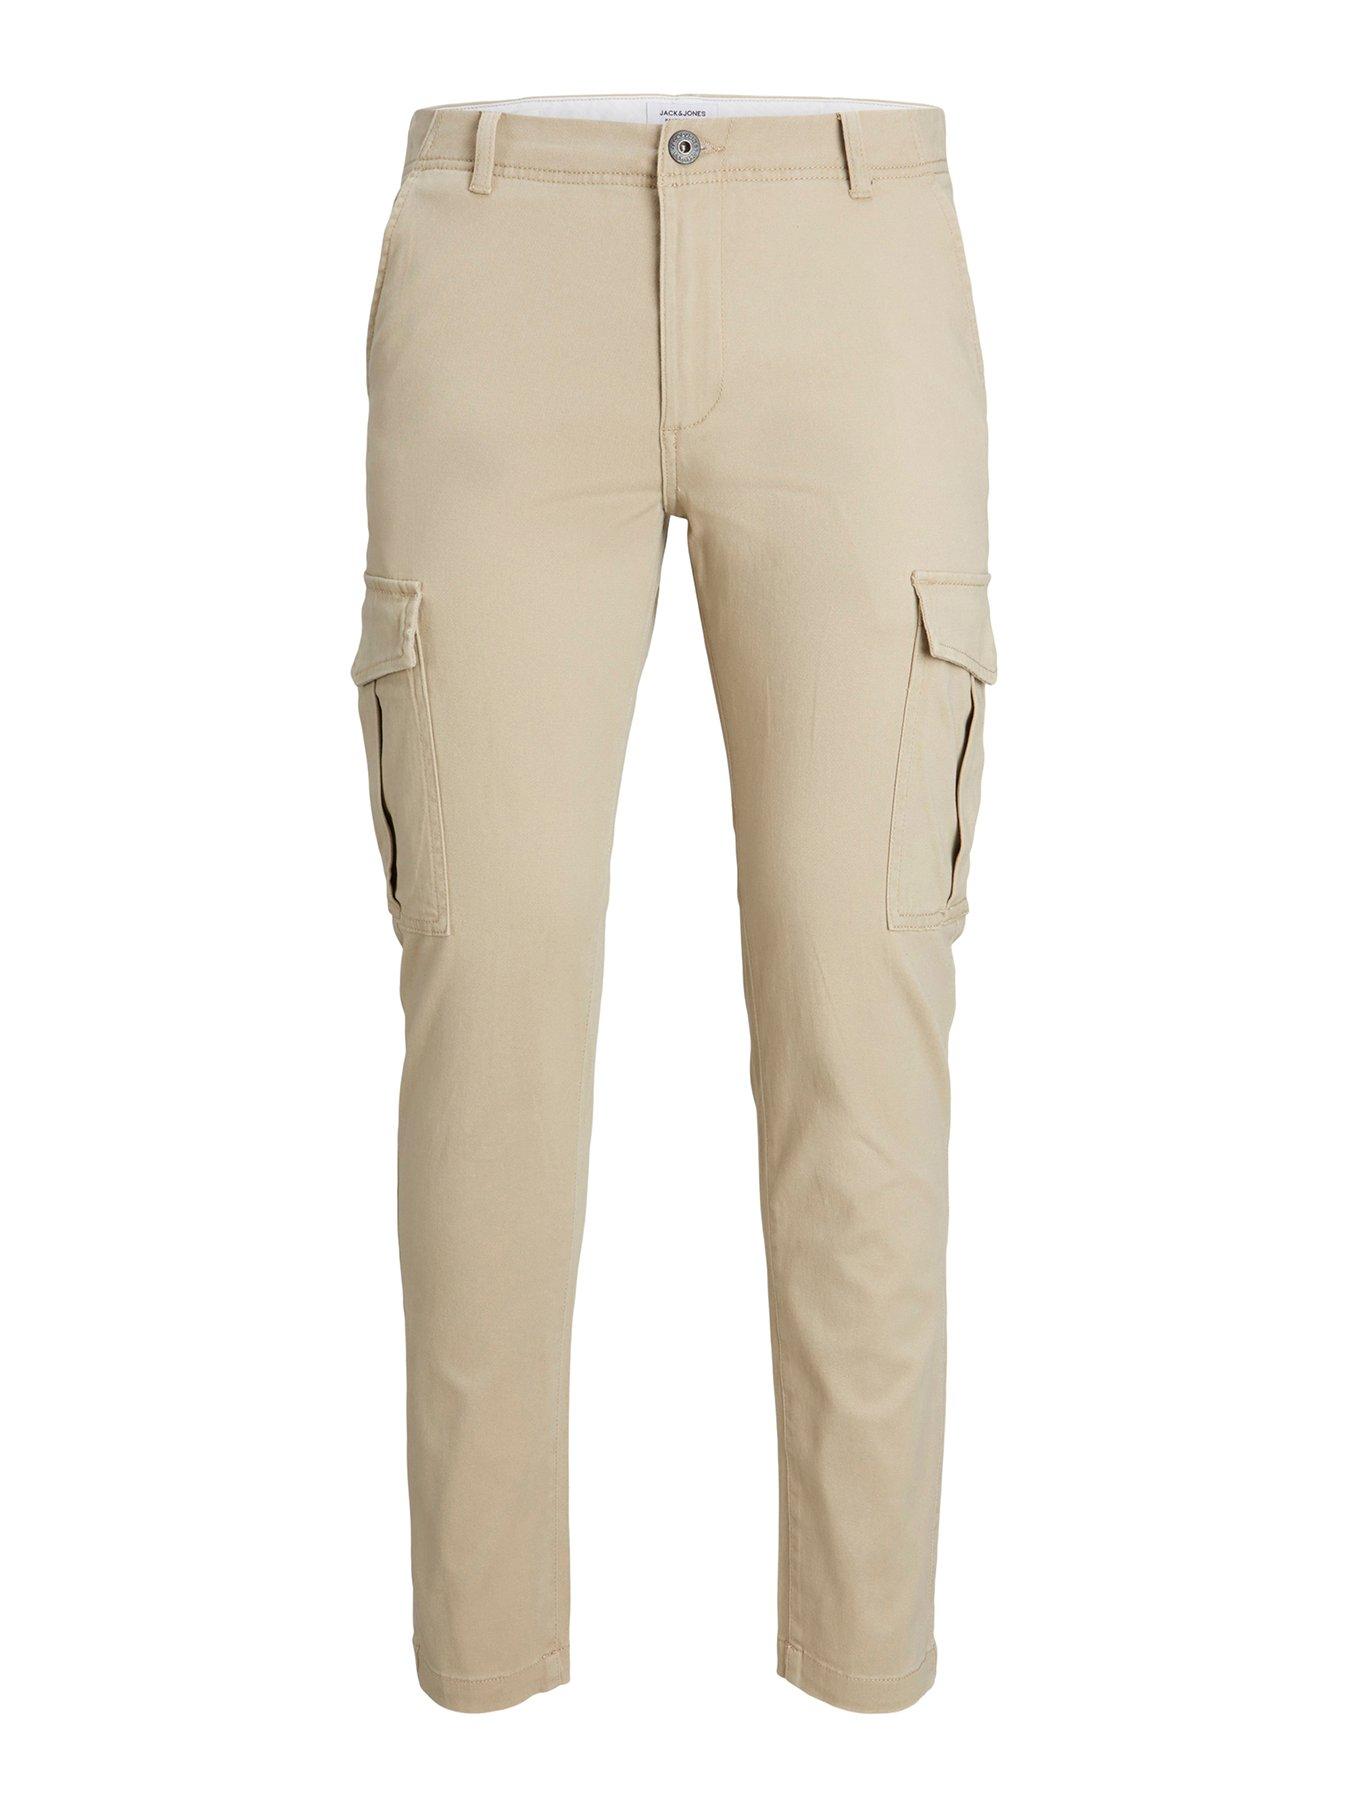 Boys' Navy Trousers | M&S